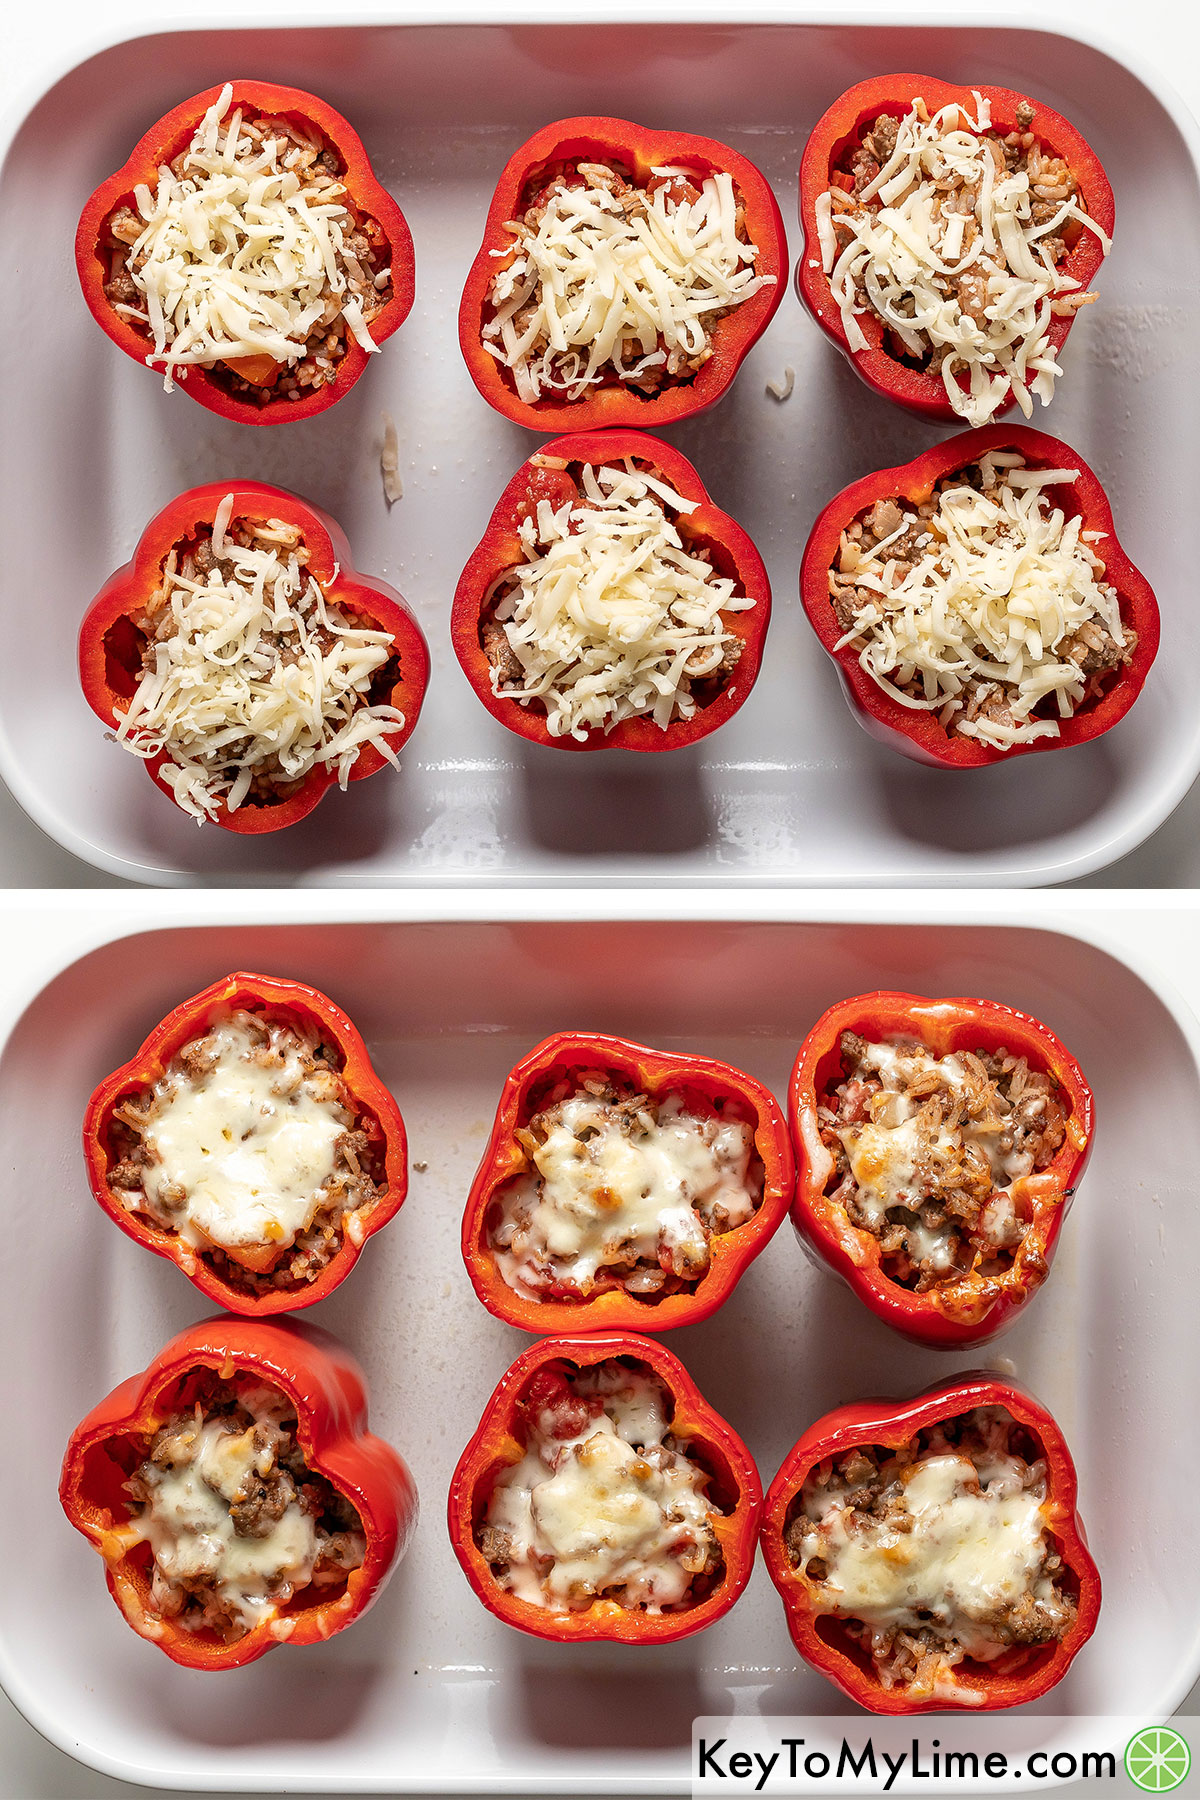 Stuffed peppers topped with shredded cheese, shown before and after baking.